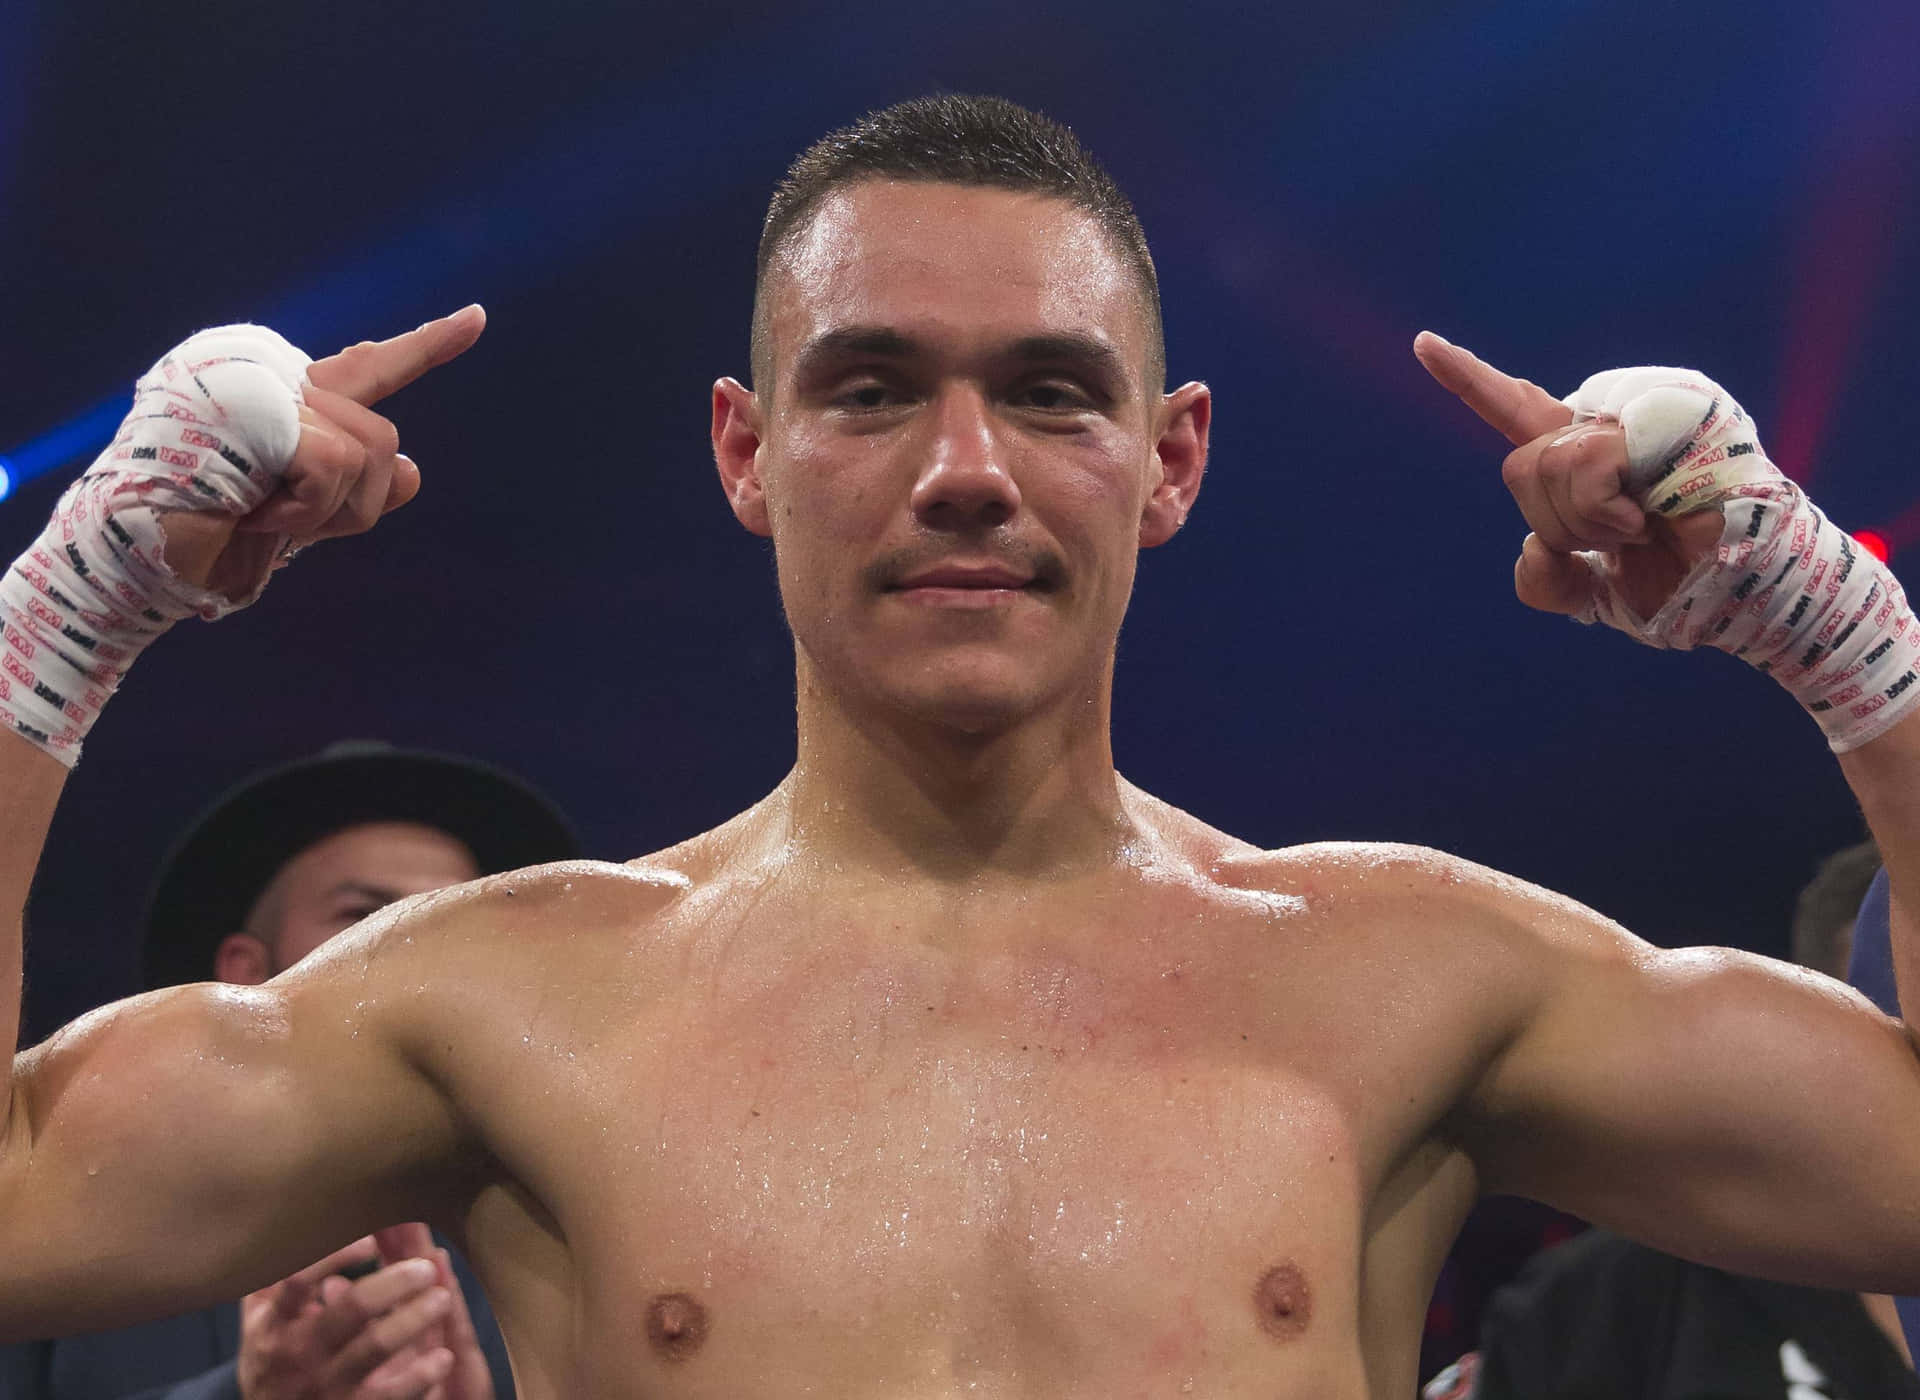 Tim Tszyu in action during a boxing match Wallpaper